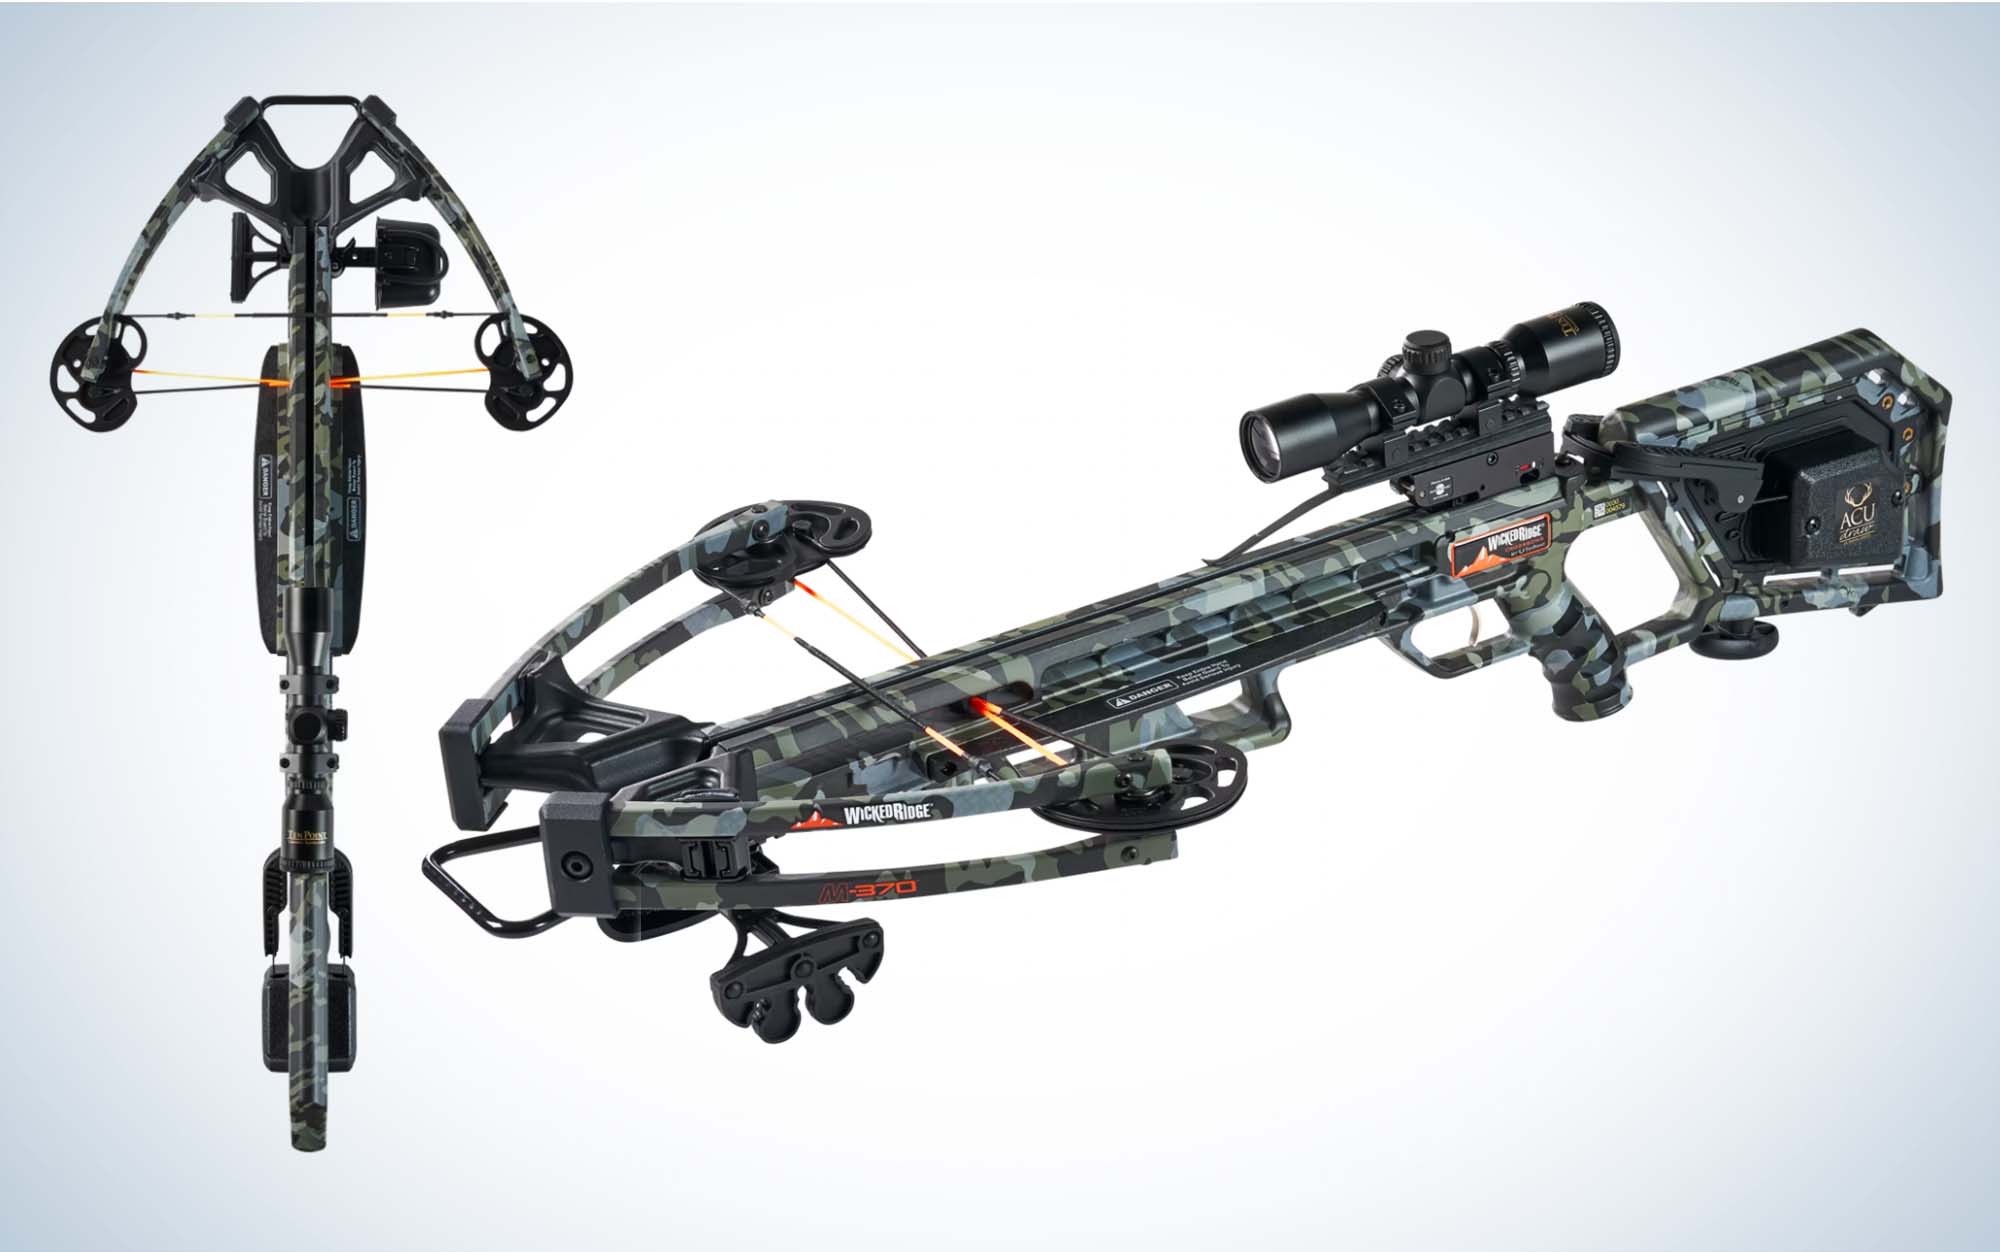 Save $300 on a Wicked Ridge Crossbow During Cabela's Fall Hunting